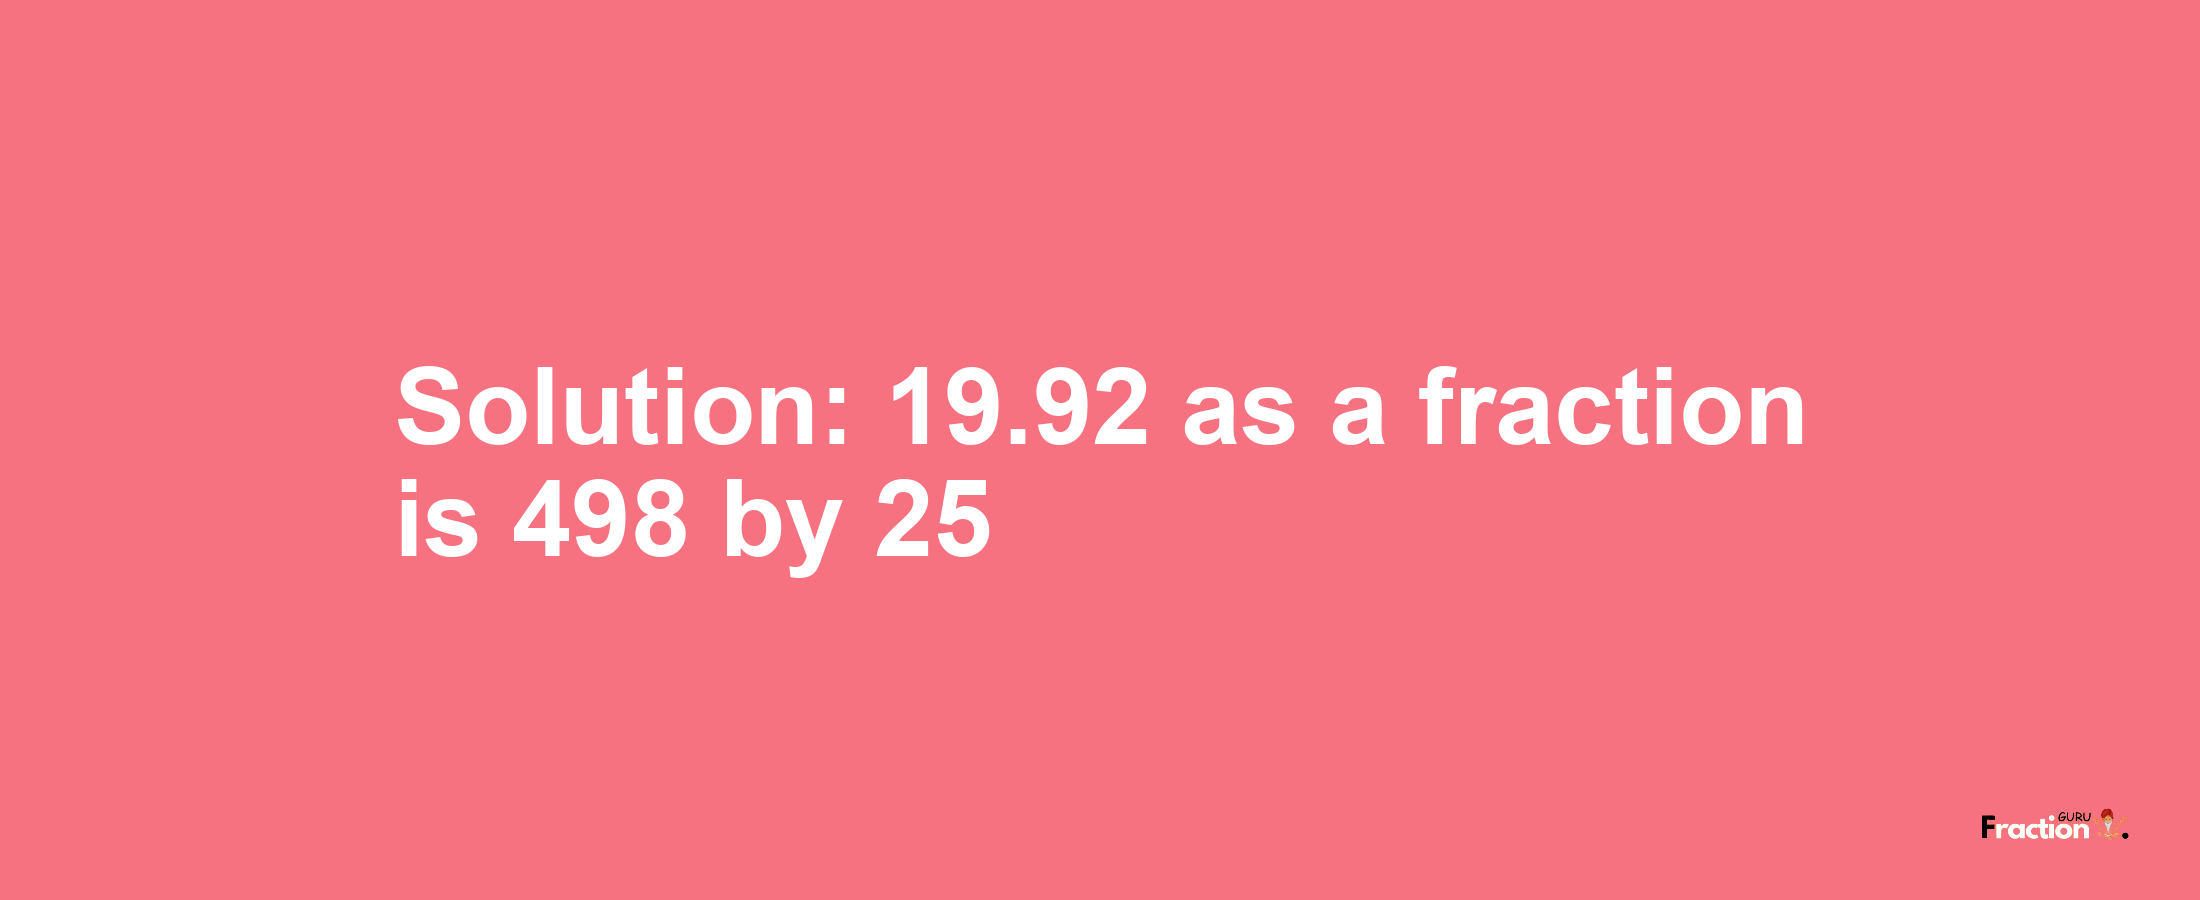 Solution:19.92 as a fraction is 498/25